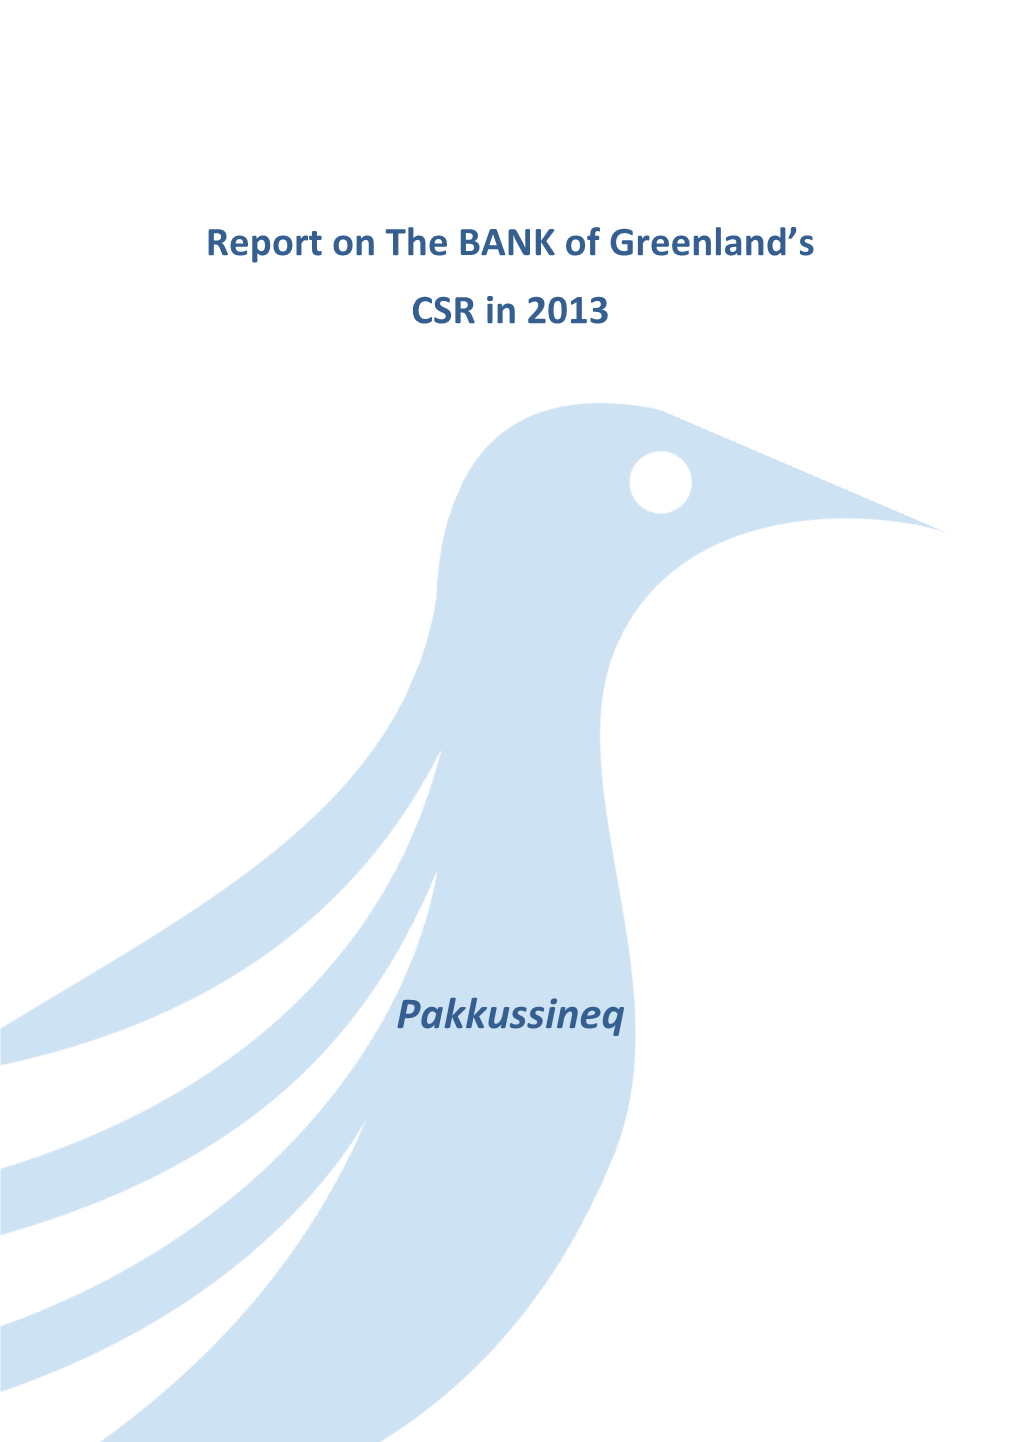 Report on the BANK of Greenland's CSR in 2013